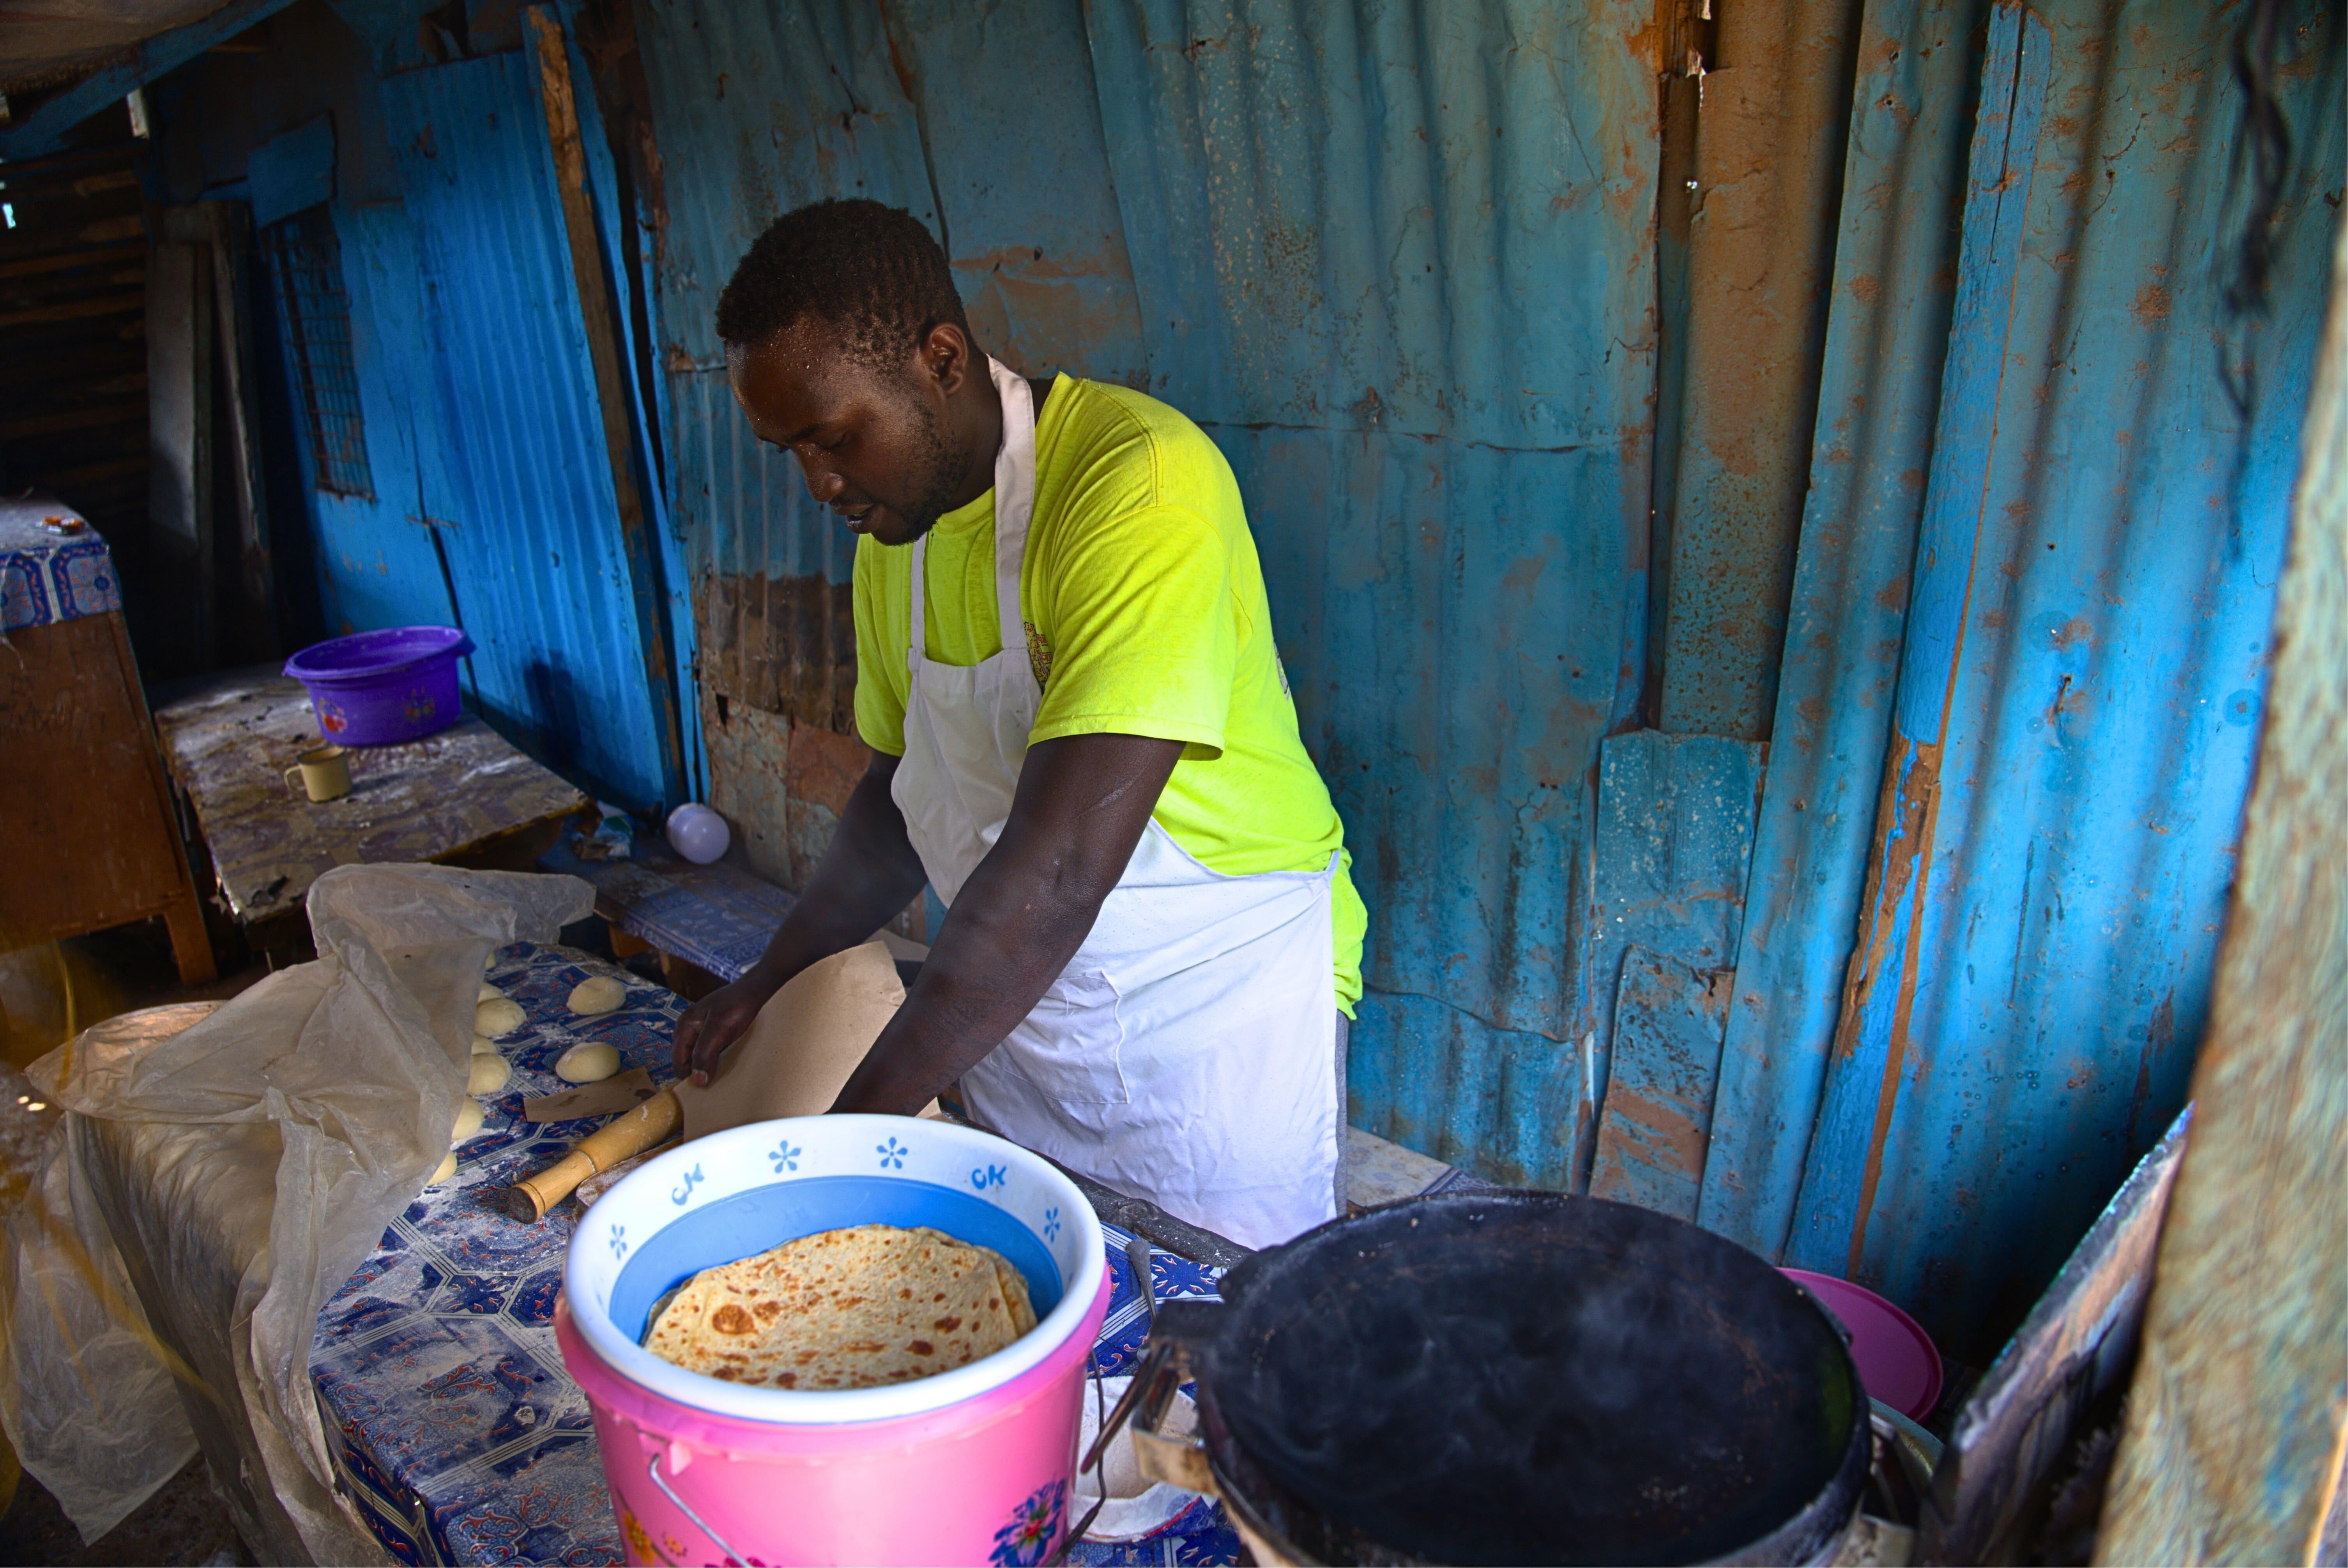 Treatment of People Who Use Drugs in Kenya: Michael Karongo at his food kiosk where he sells chapatis. Michael has been in recovery for 5 years and is reintegrated into the society, and now owns his business and goes to school too.